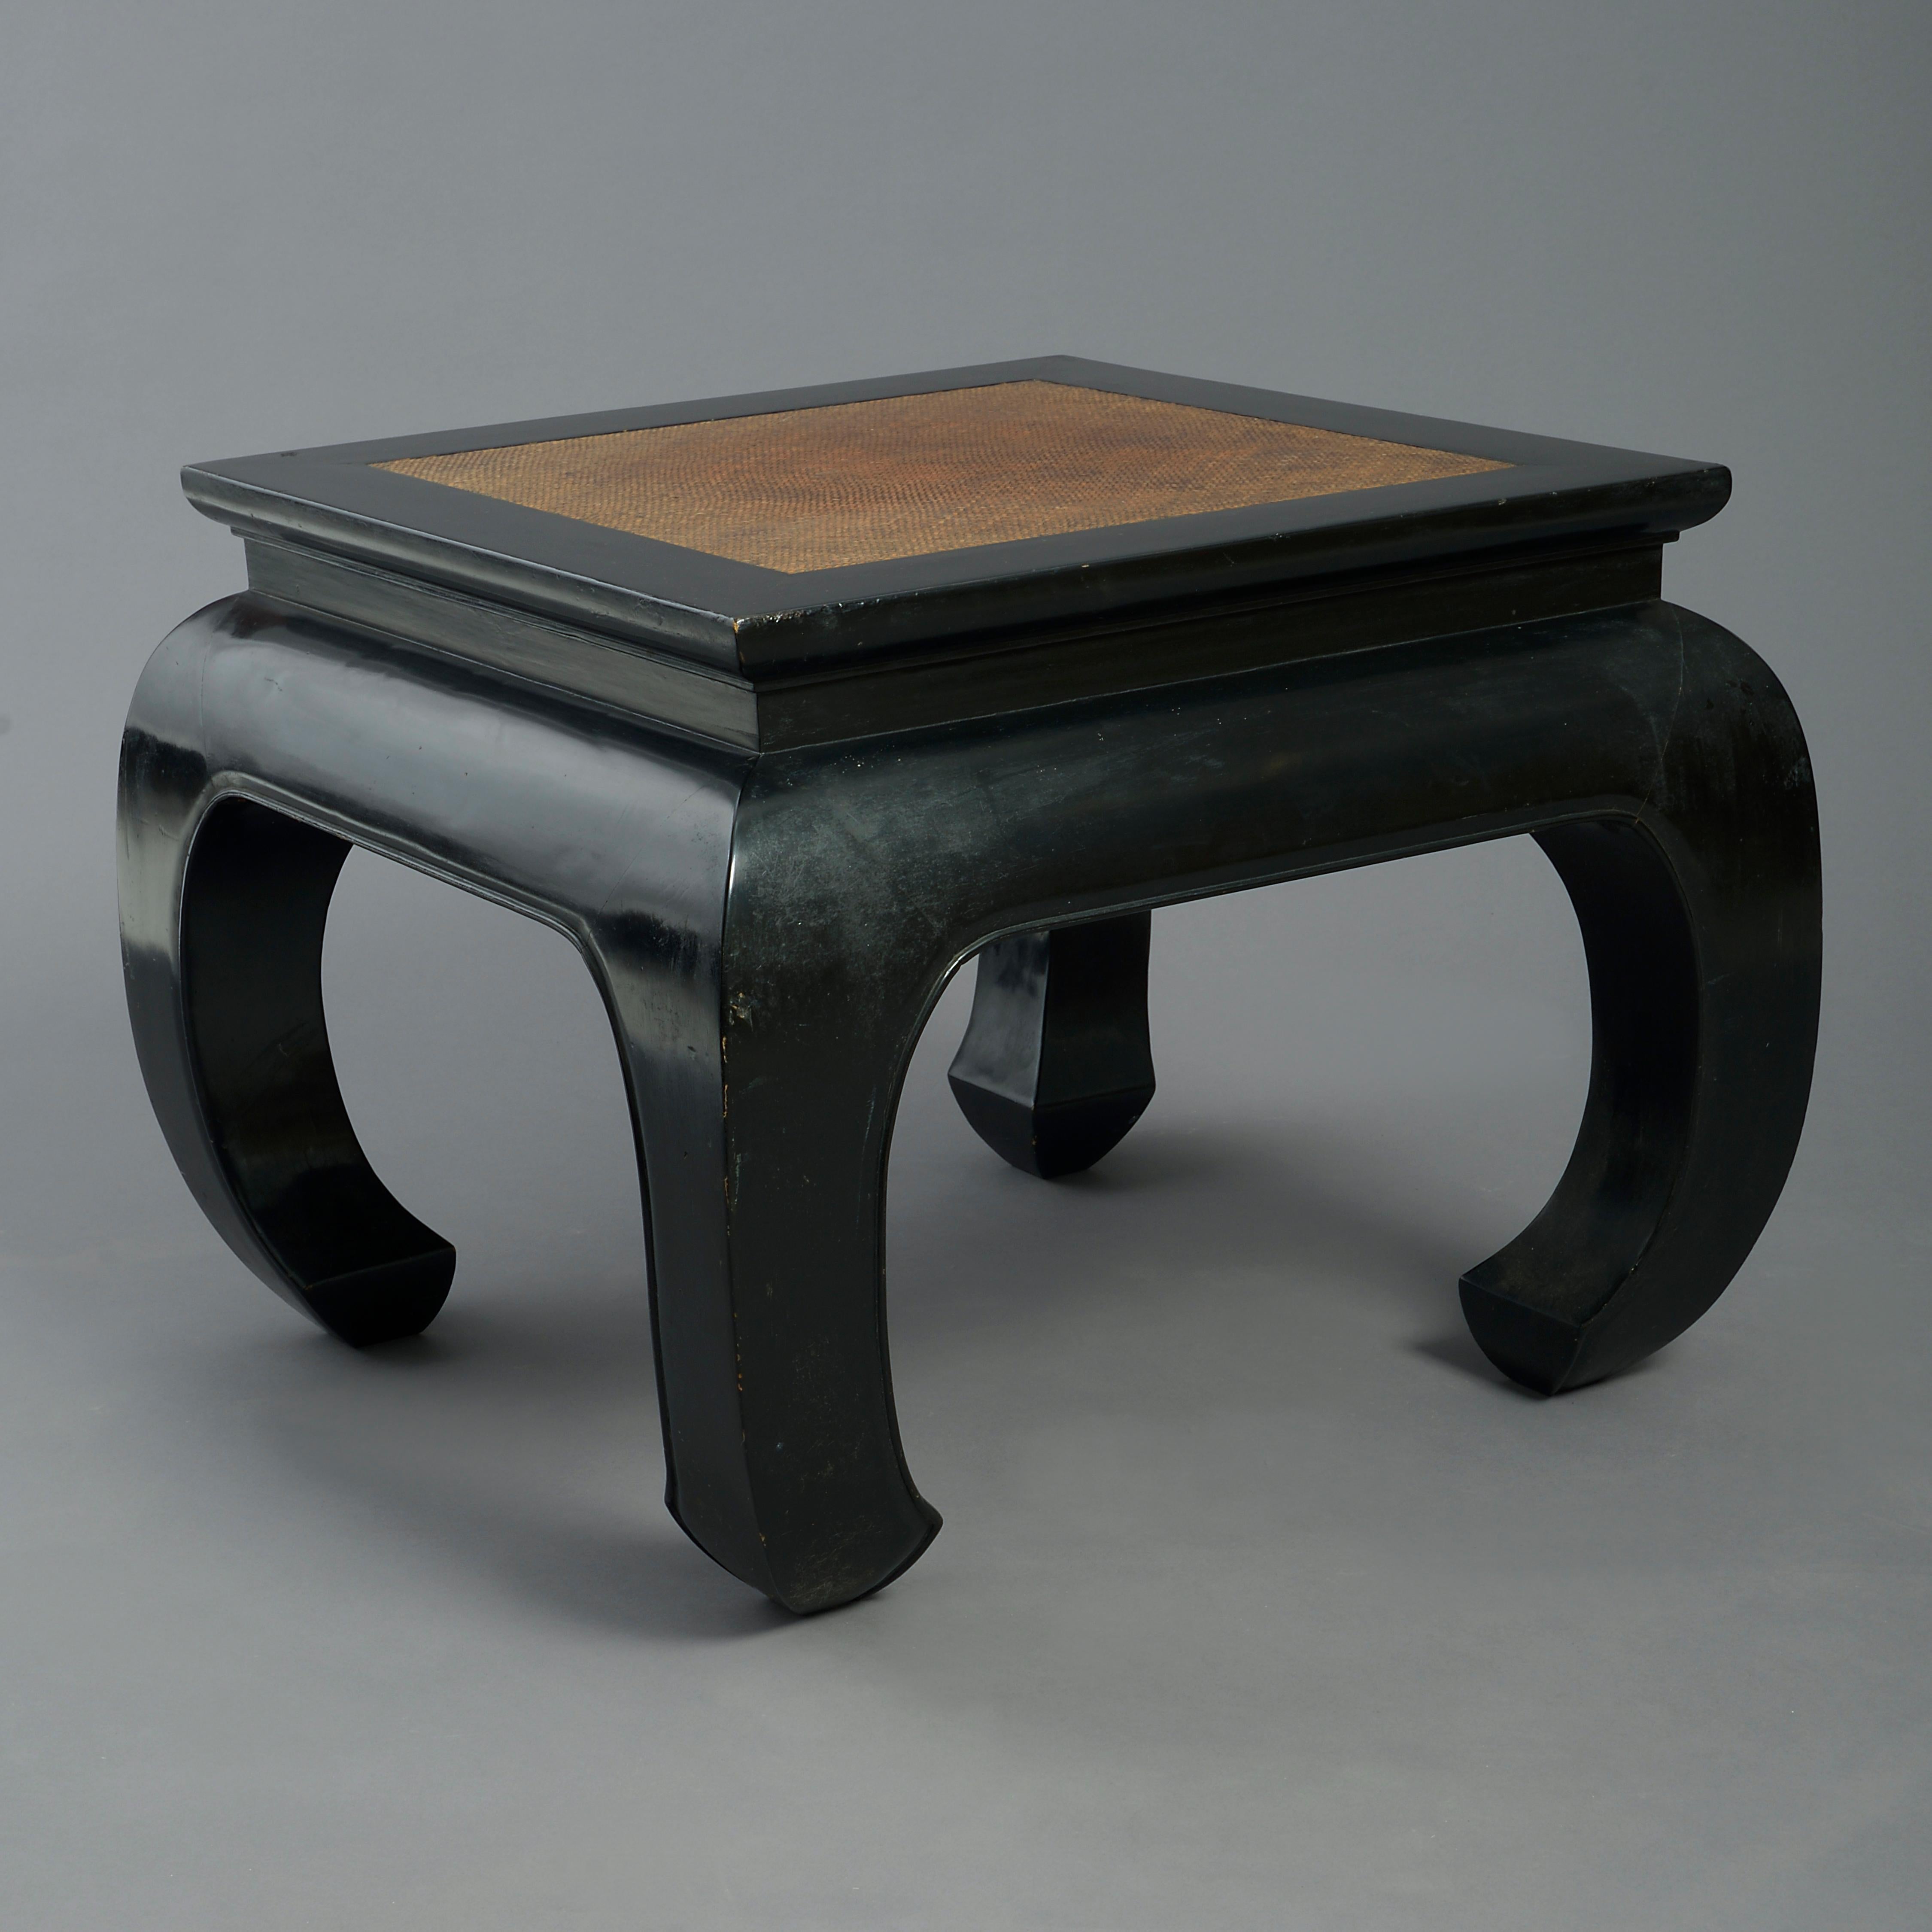 Chinese 20th Century Black Lacquer Low Table For Sale